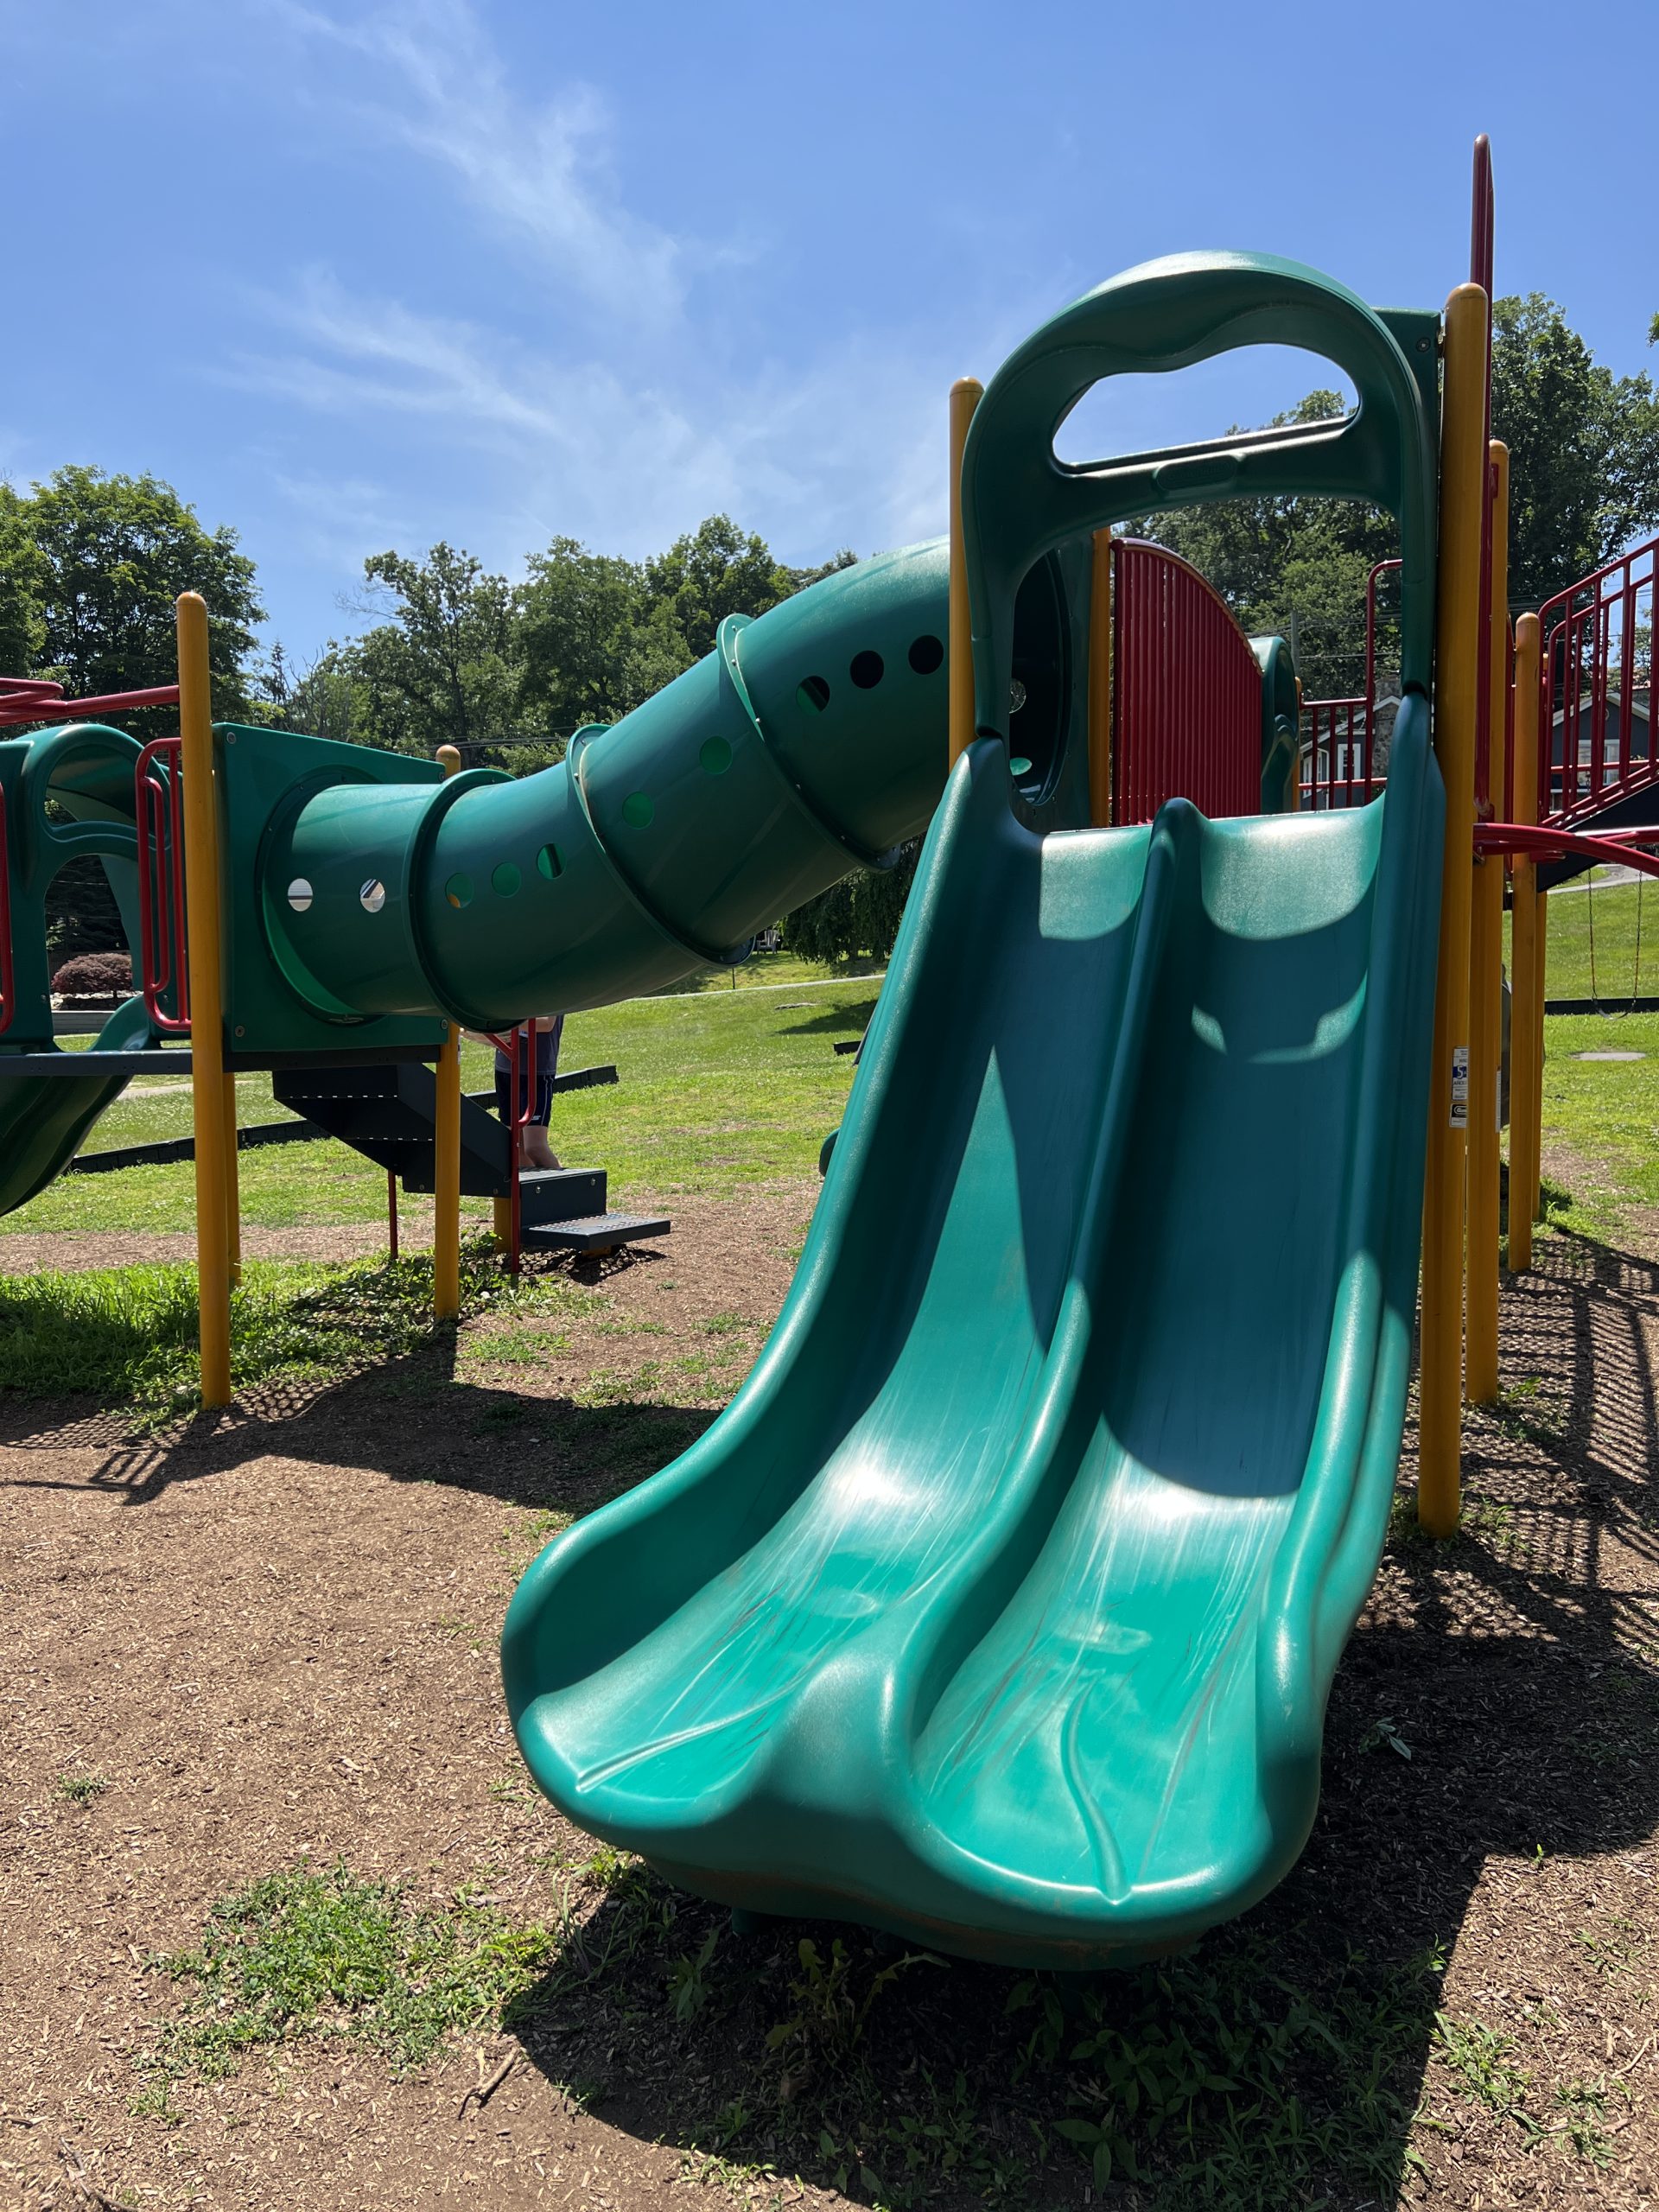 SLIDE side by side at Modick Park Playground in Hopatcong NJ